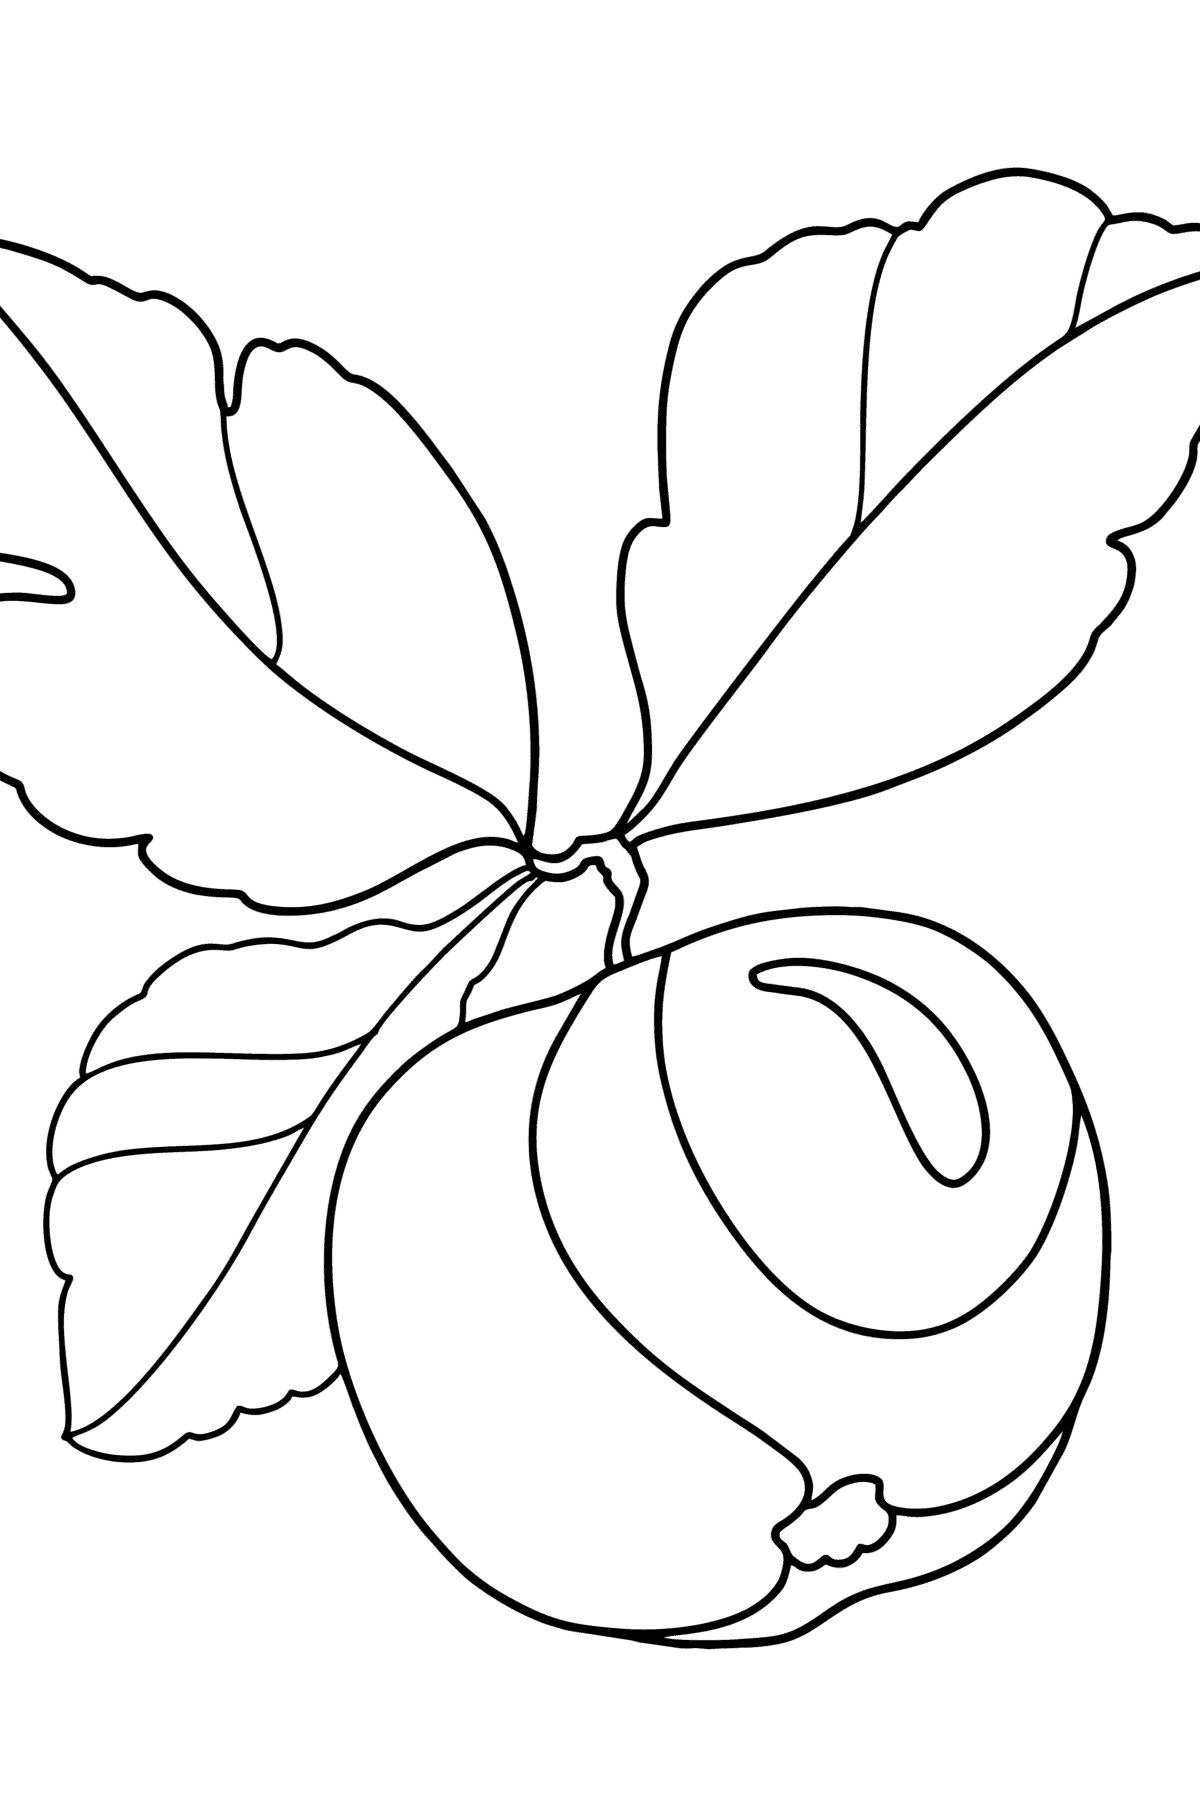 Yellow apple сoloring page - Coloring Pages for Kids